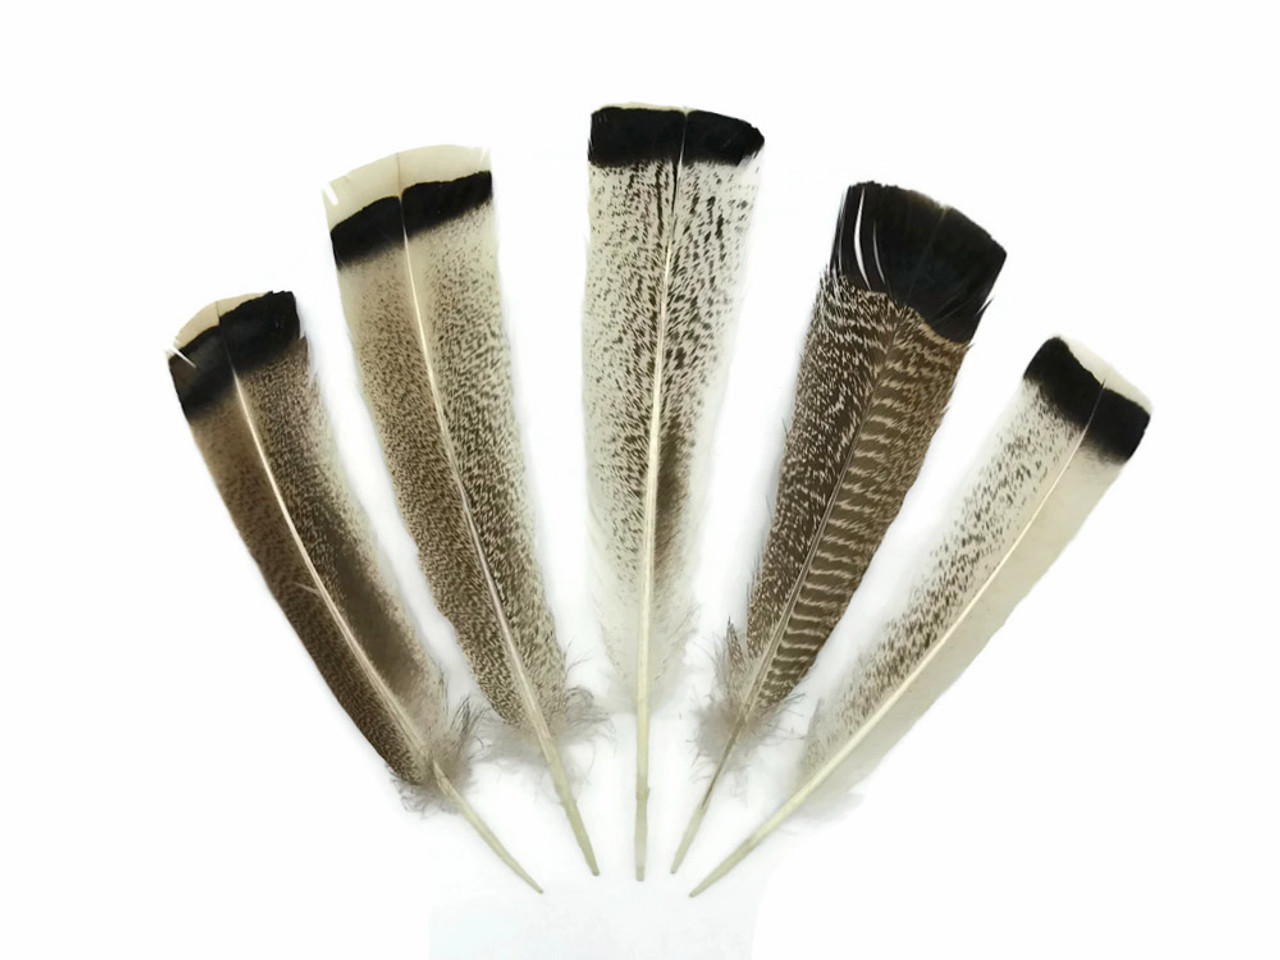  Moonlight Feather  50 Pieces - Turkey Feathers